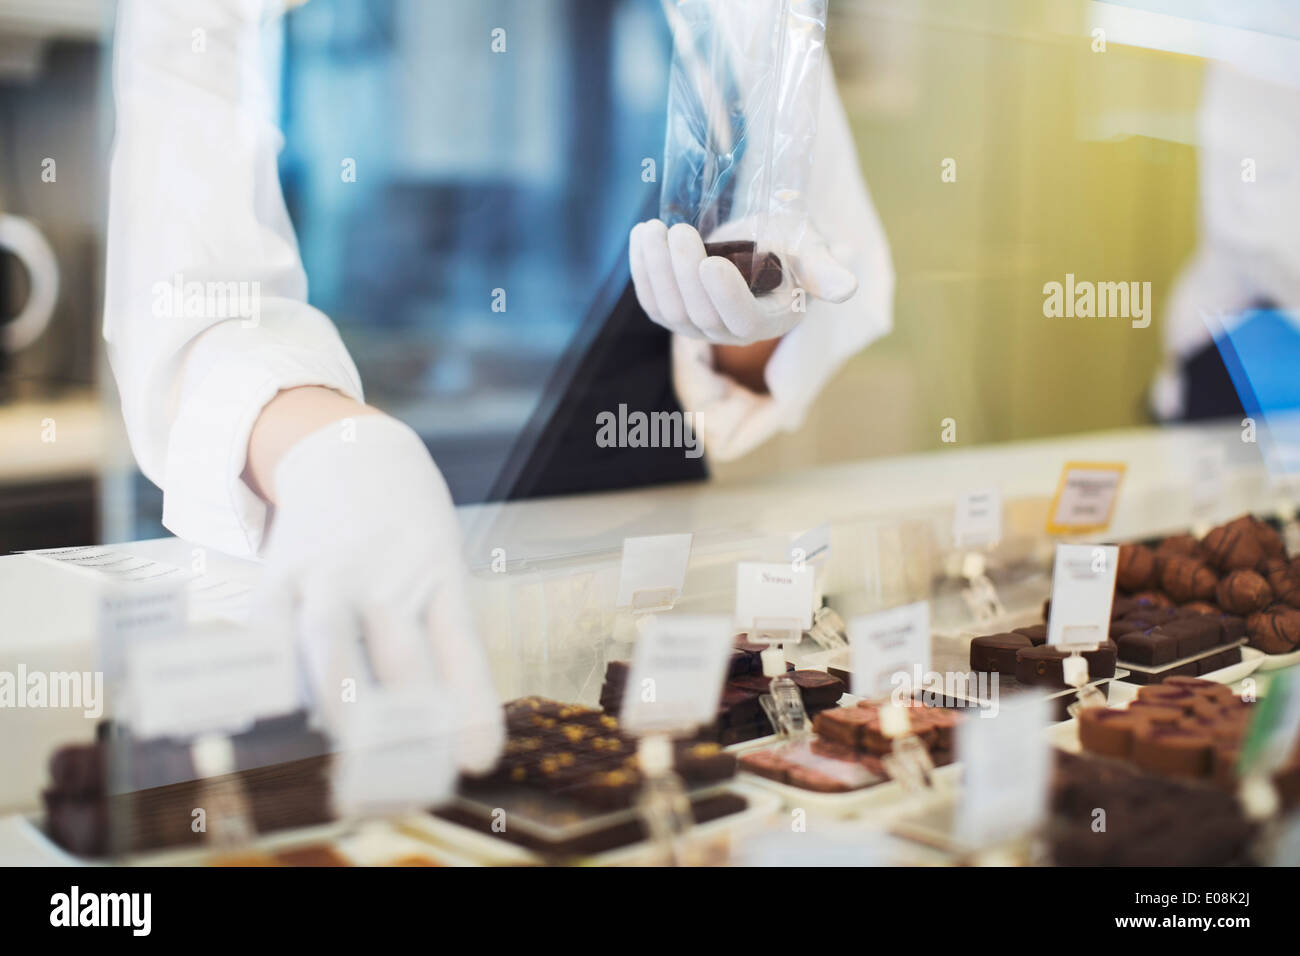 Midsection of female worker packing sweet food at display cabinet in cafe Stock Photo